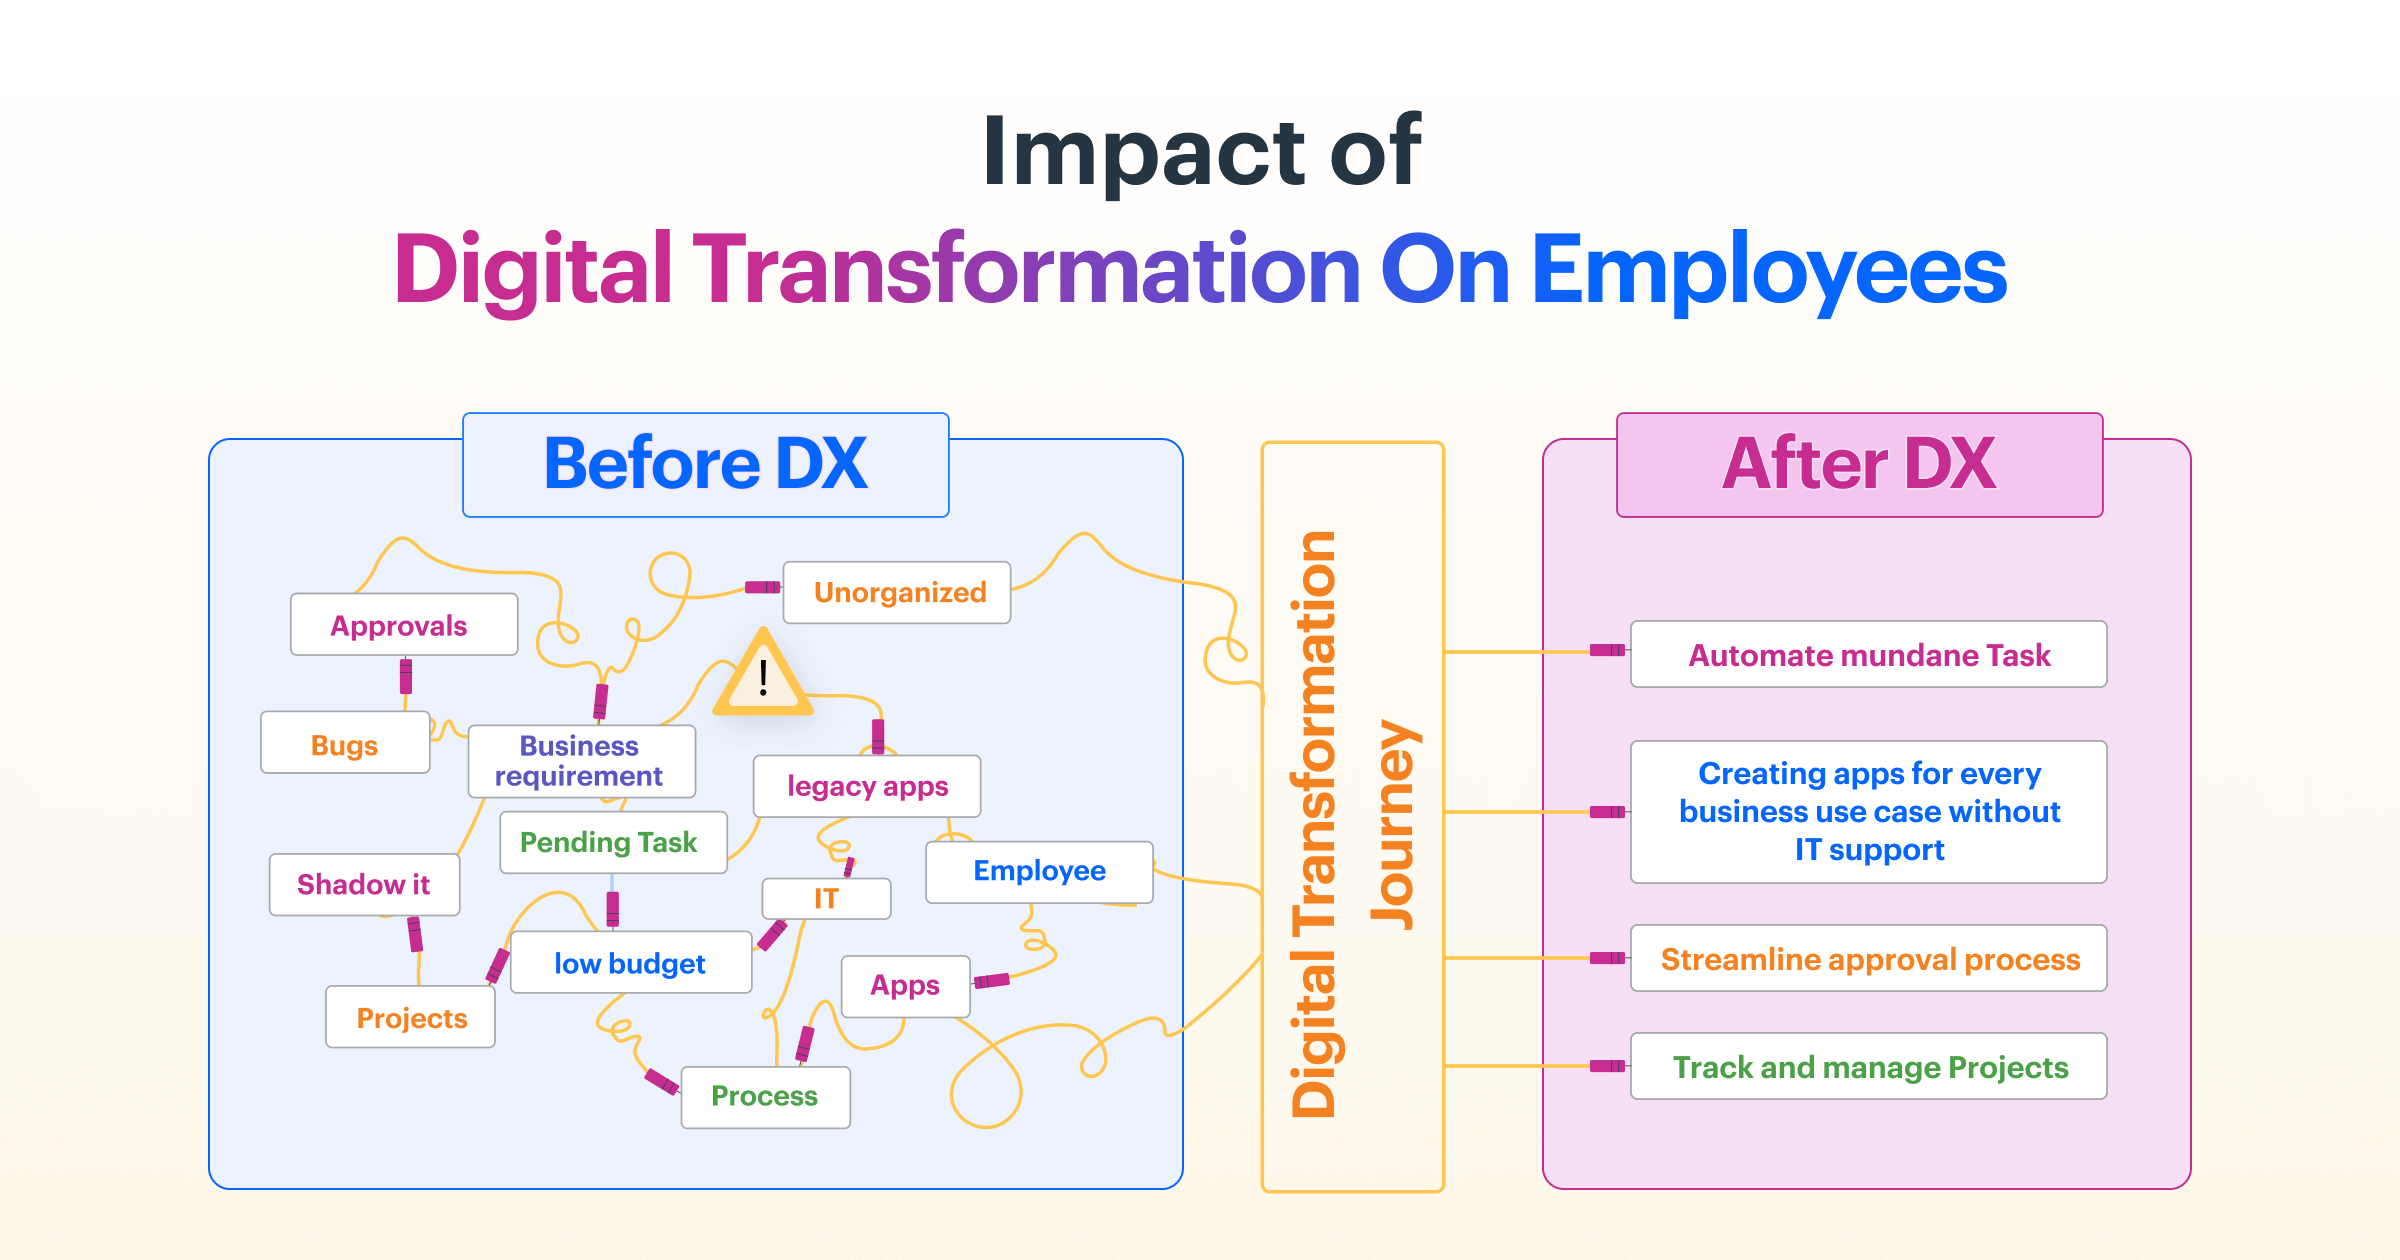 Impact of Digital transformation on employees